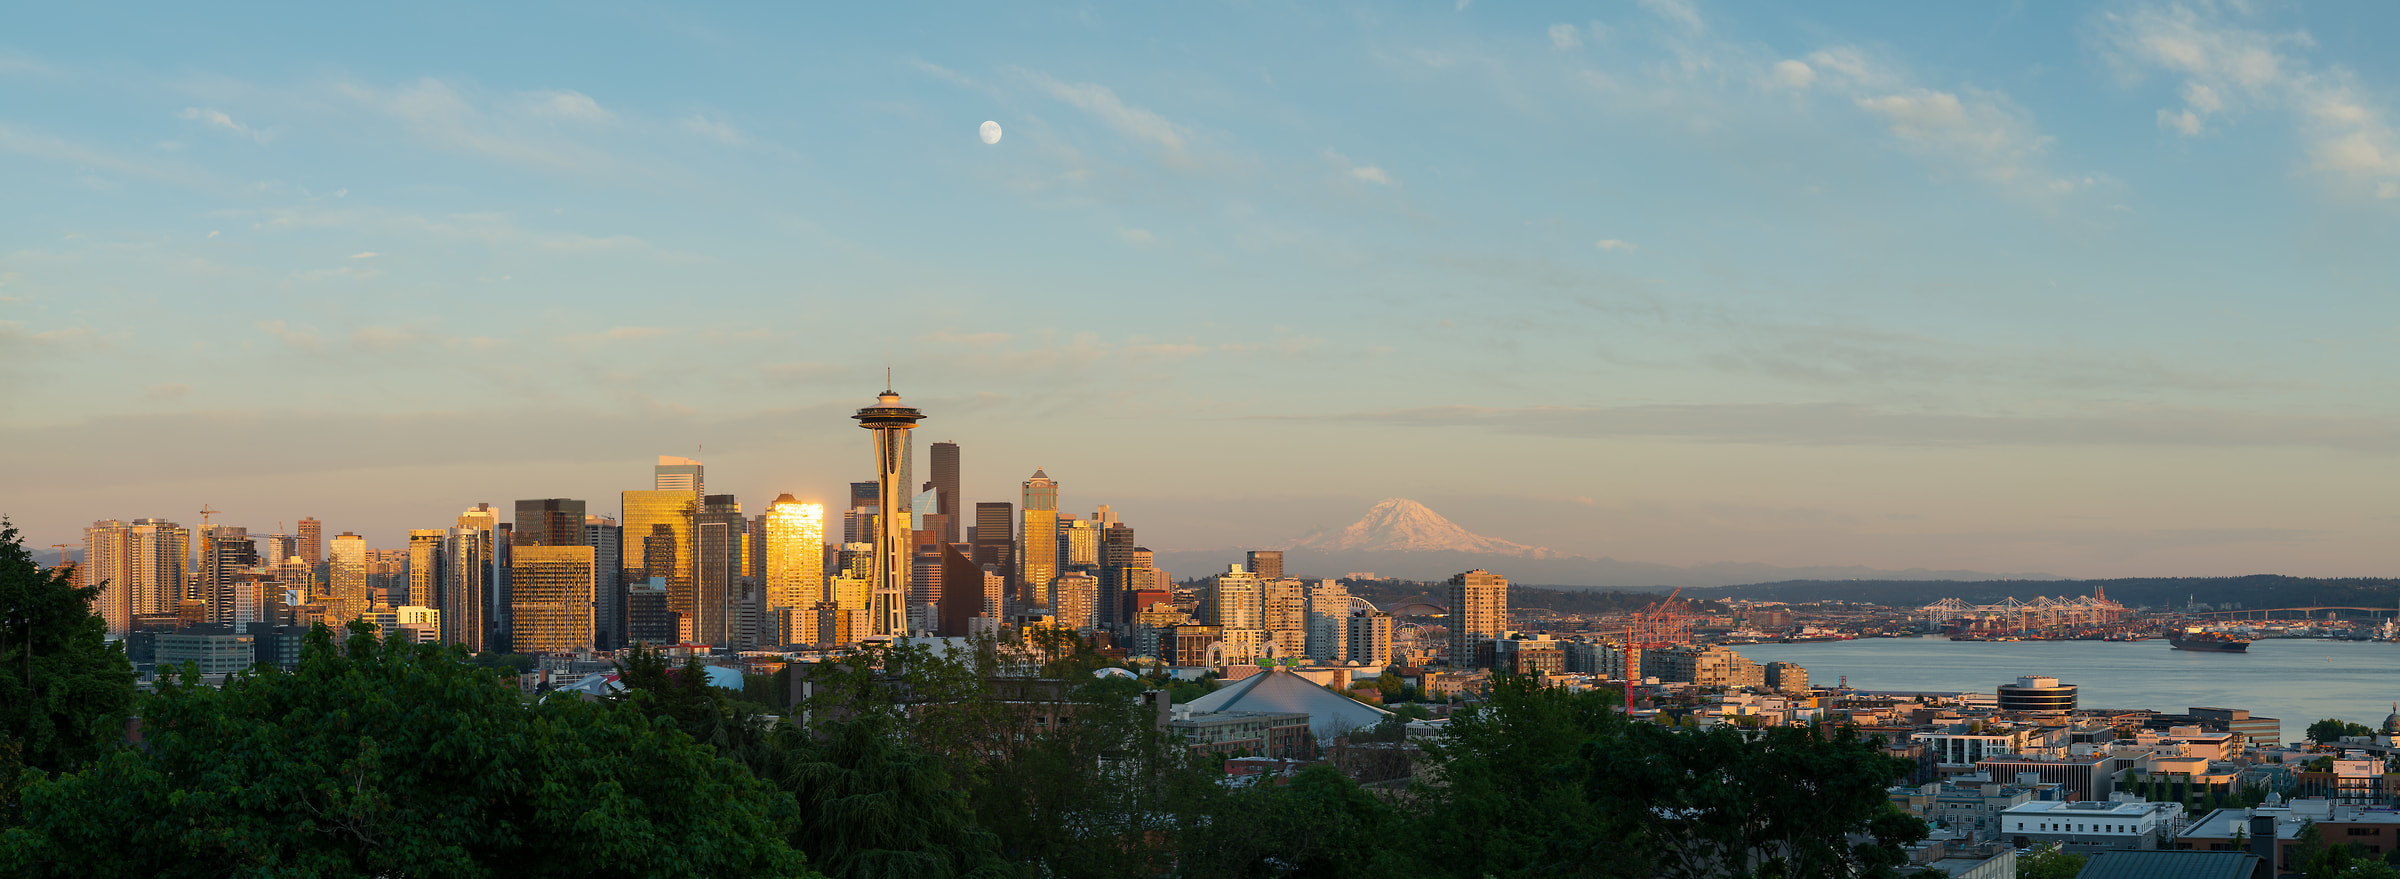 350 megapixels! A very high resolution, large-format VAST photo print of the Seattle skyline with Mt. Rainier and the moon in the background; cityscape photograph created by Greg Probst in Seattle, WA.